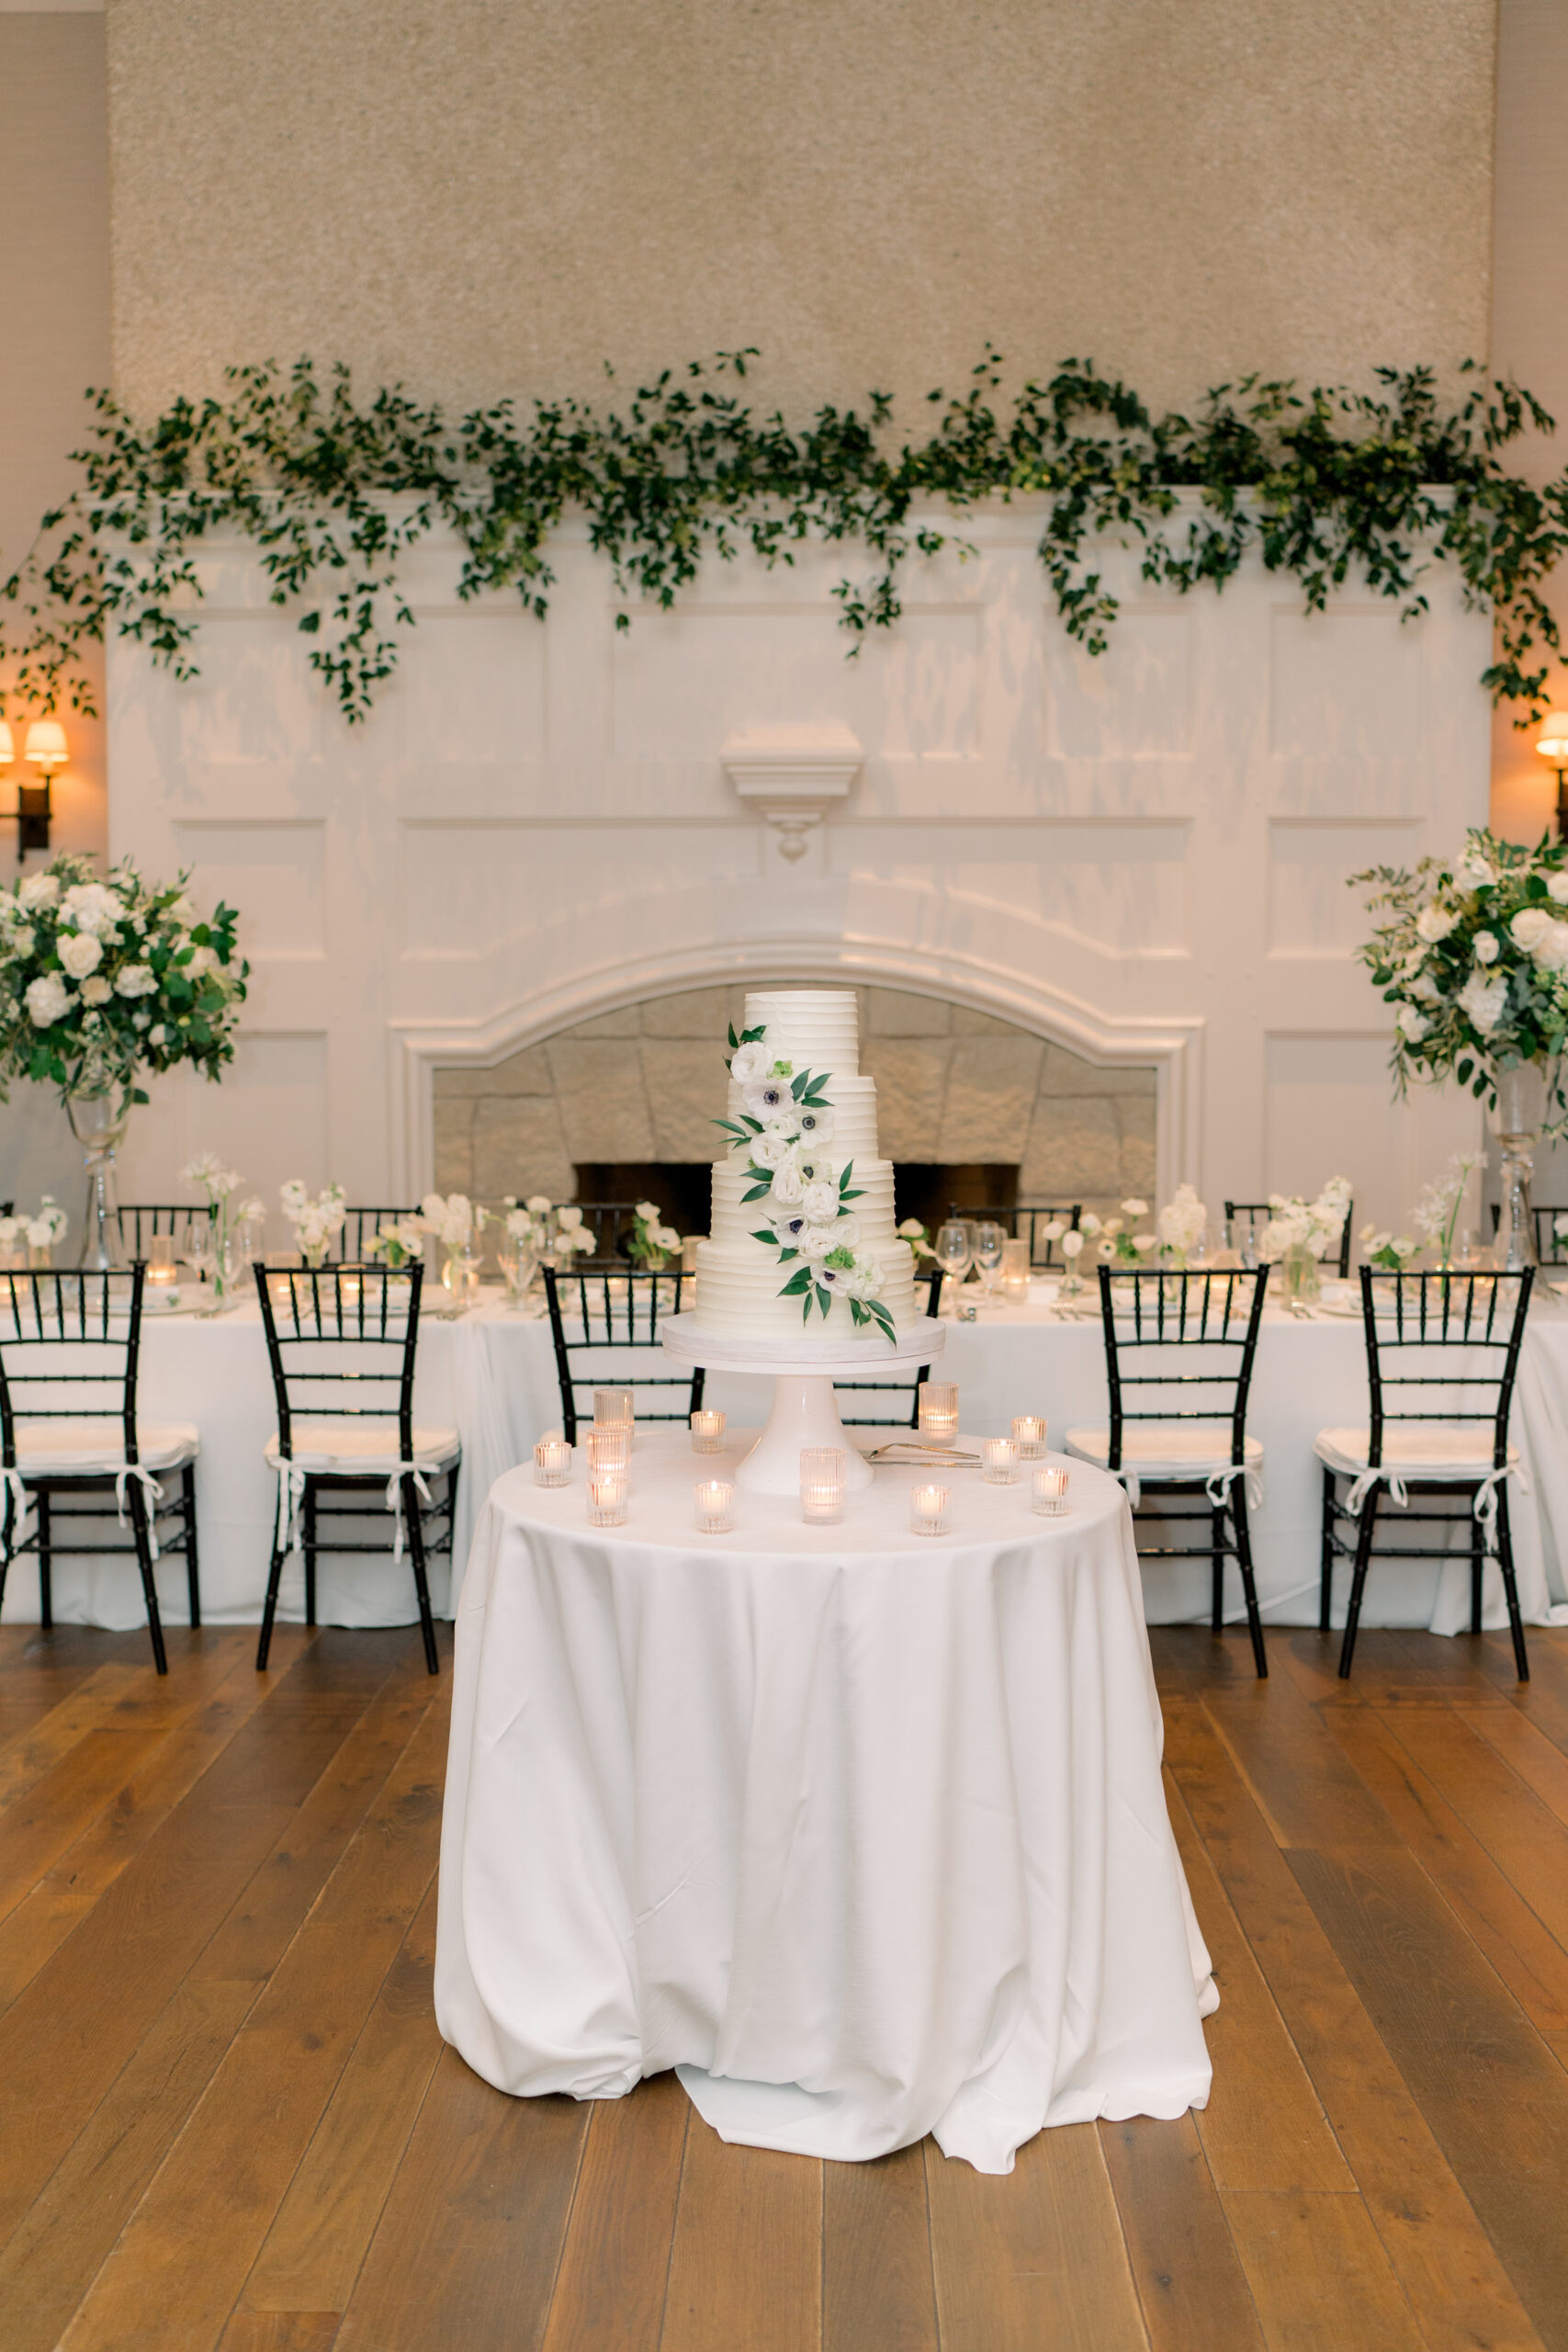 White and green wedding cake in front of the fireplace decorated in greenery. 